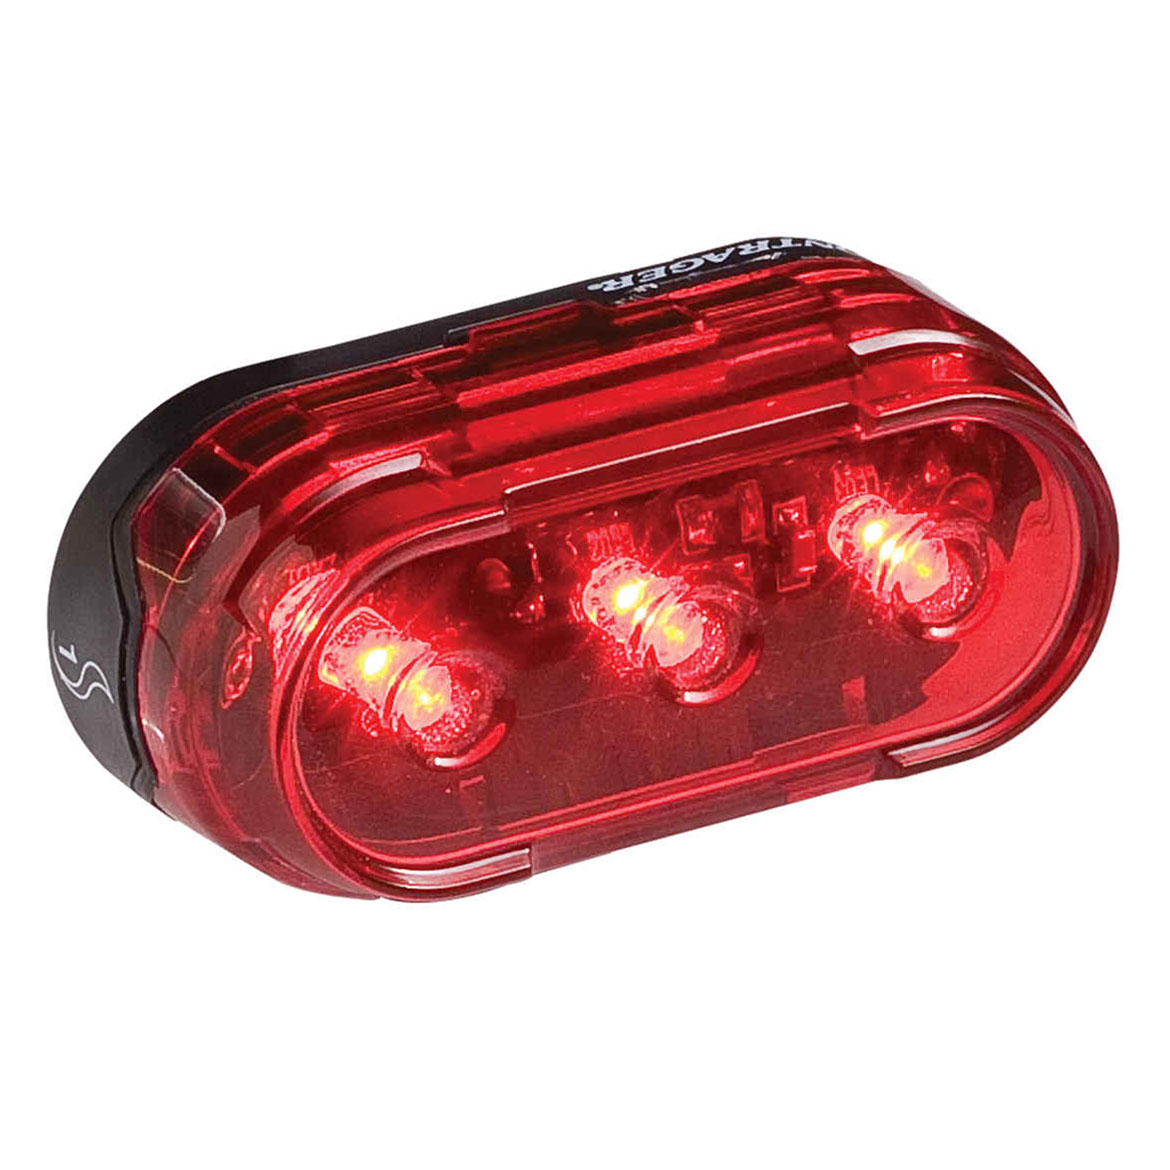 RP-Bont-Flare1-Taillight-BLK-11367